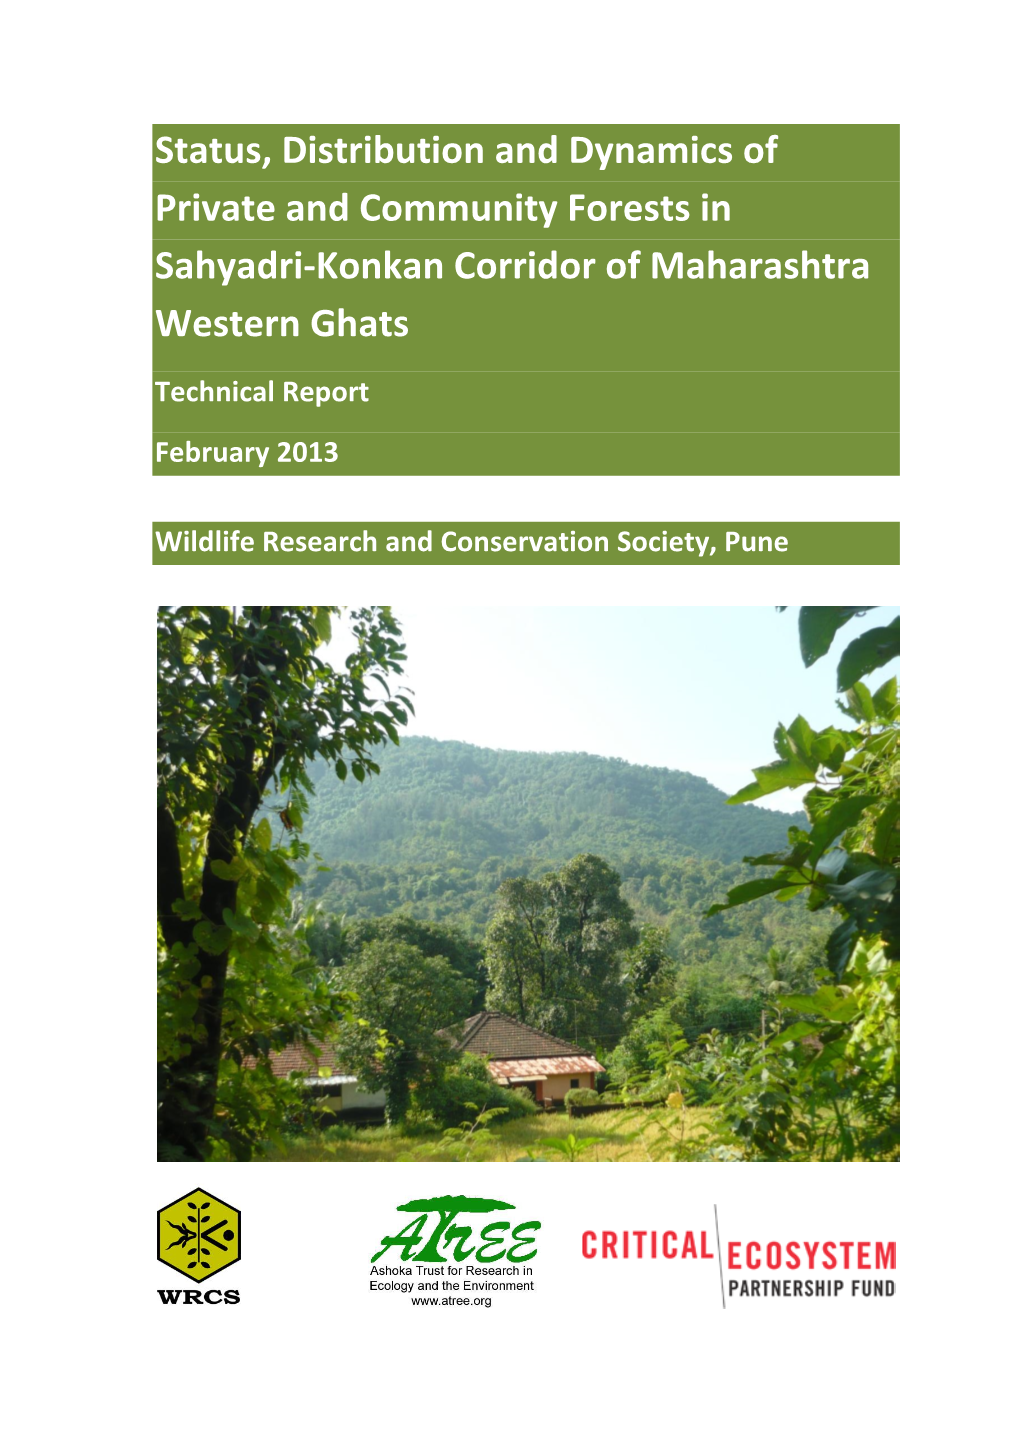 Status, Distribution and Dynamics of Private and Community Forests in Sahyadri-Konkan Corridor of Maharashtra Western Ghats